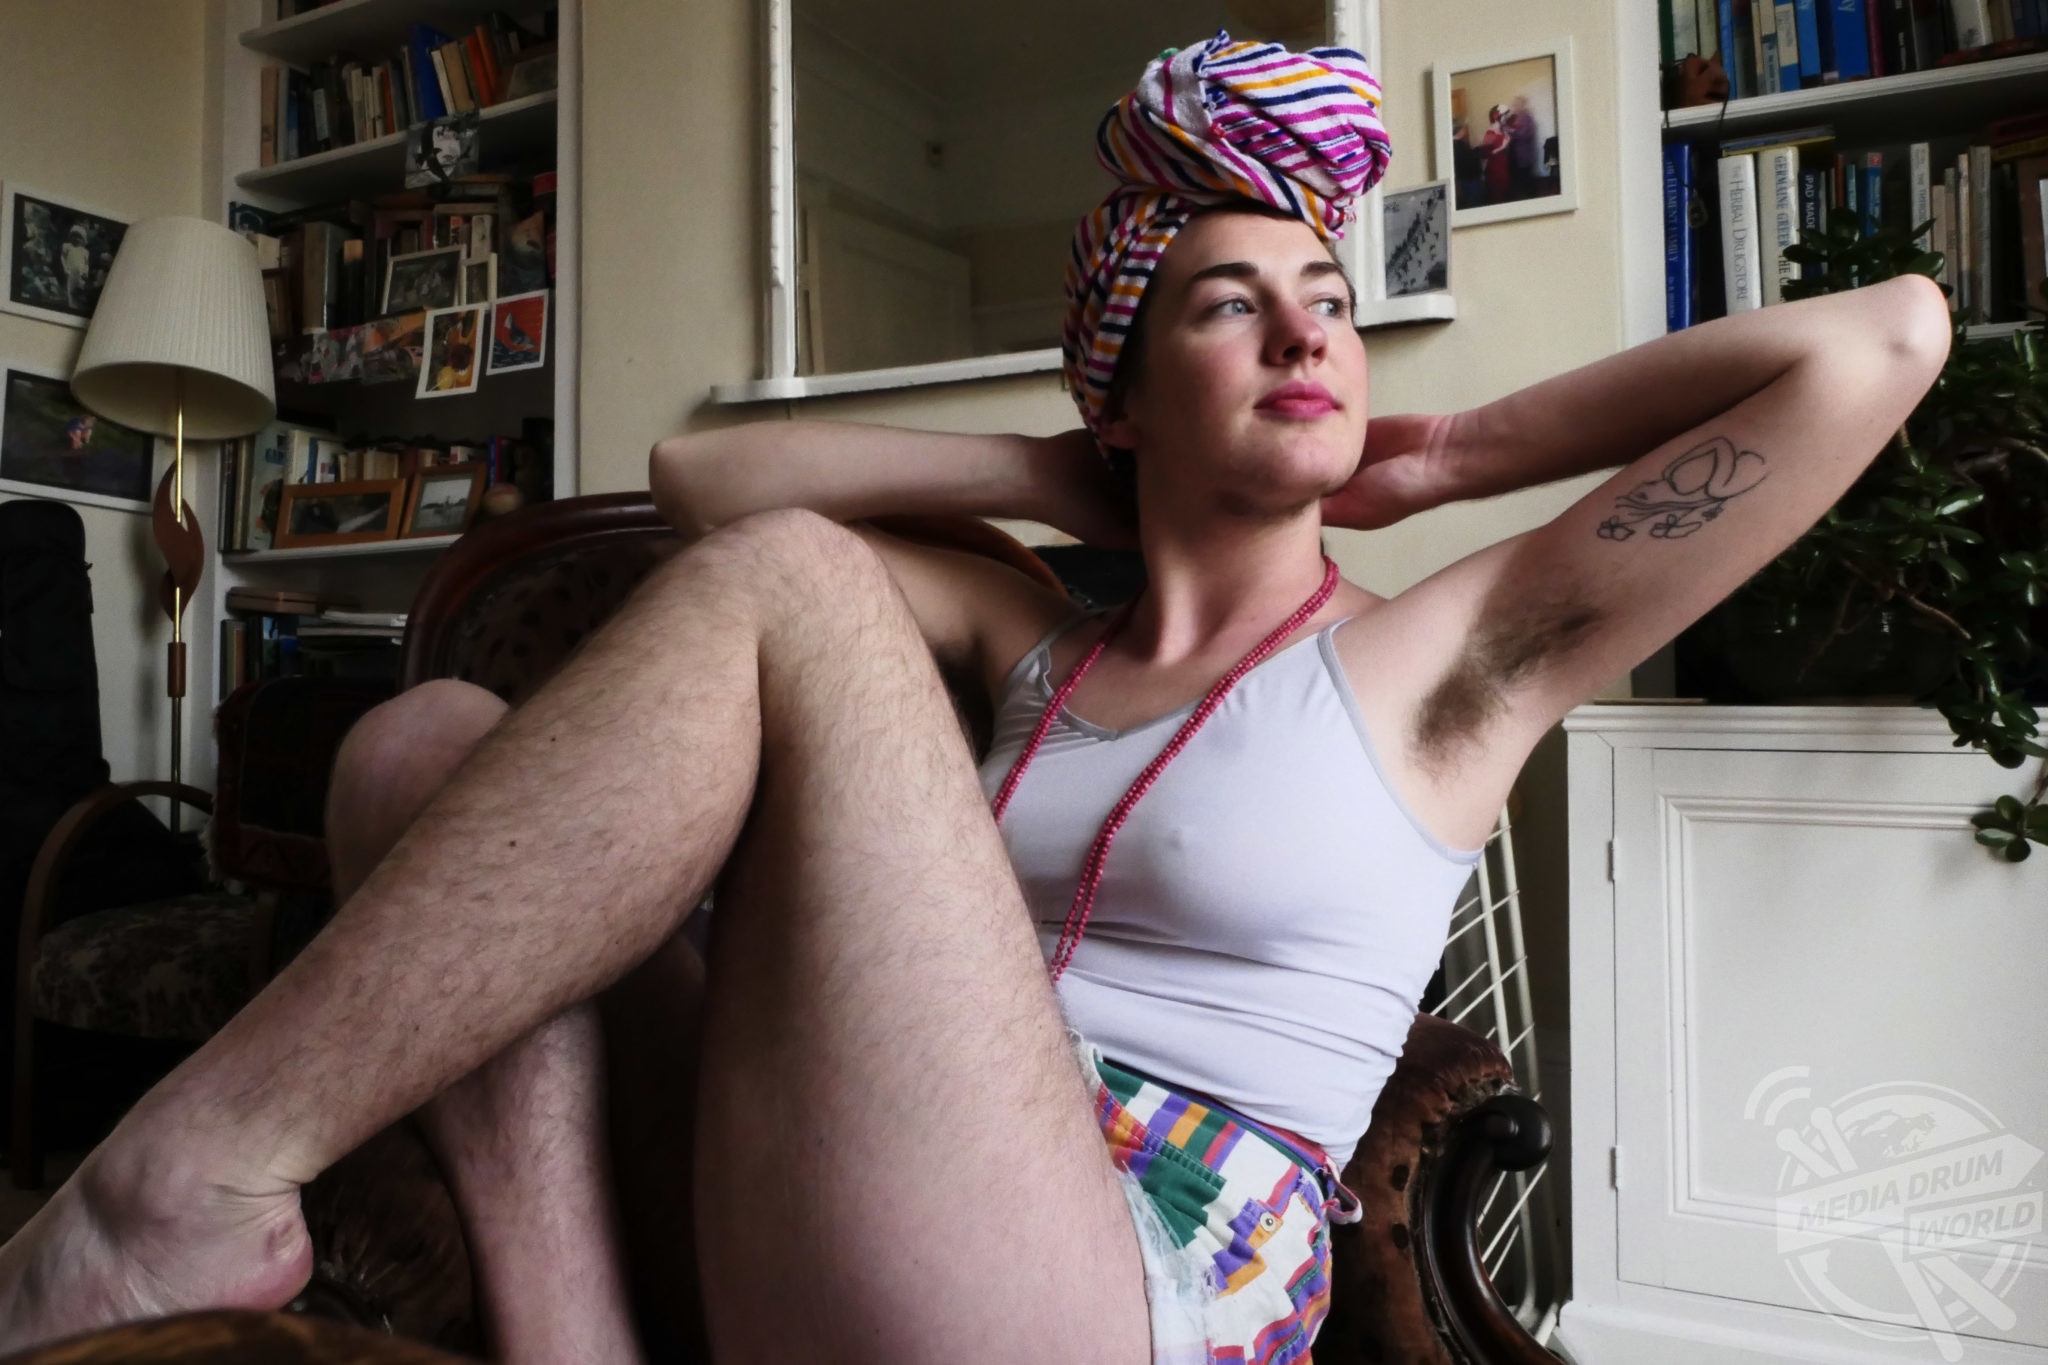 Woman Embraces Her Hairy Body After Years Of Believing It Was Unattractive.